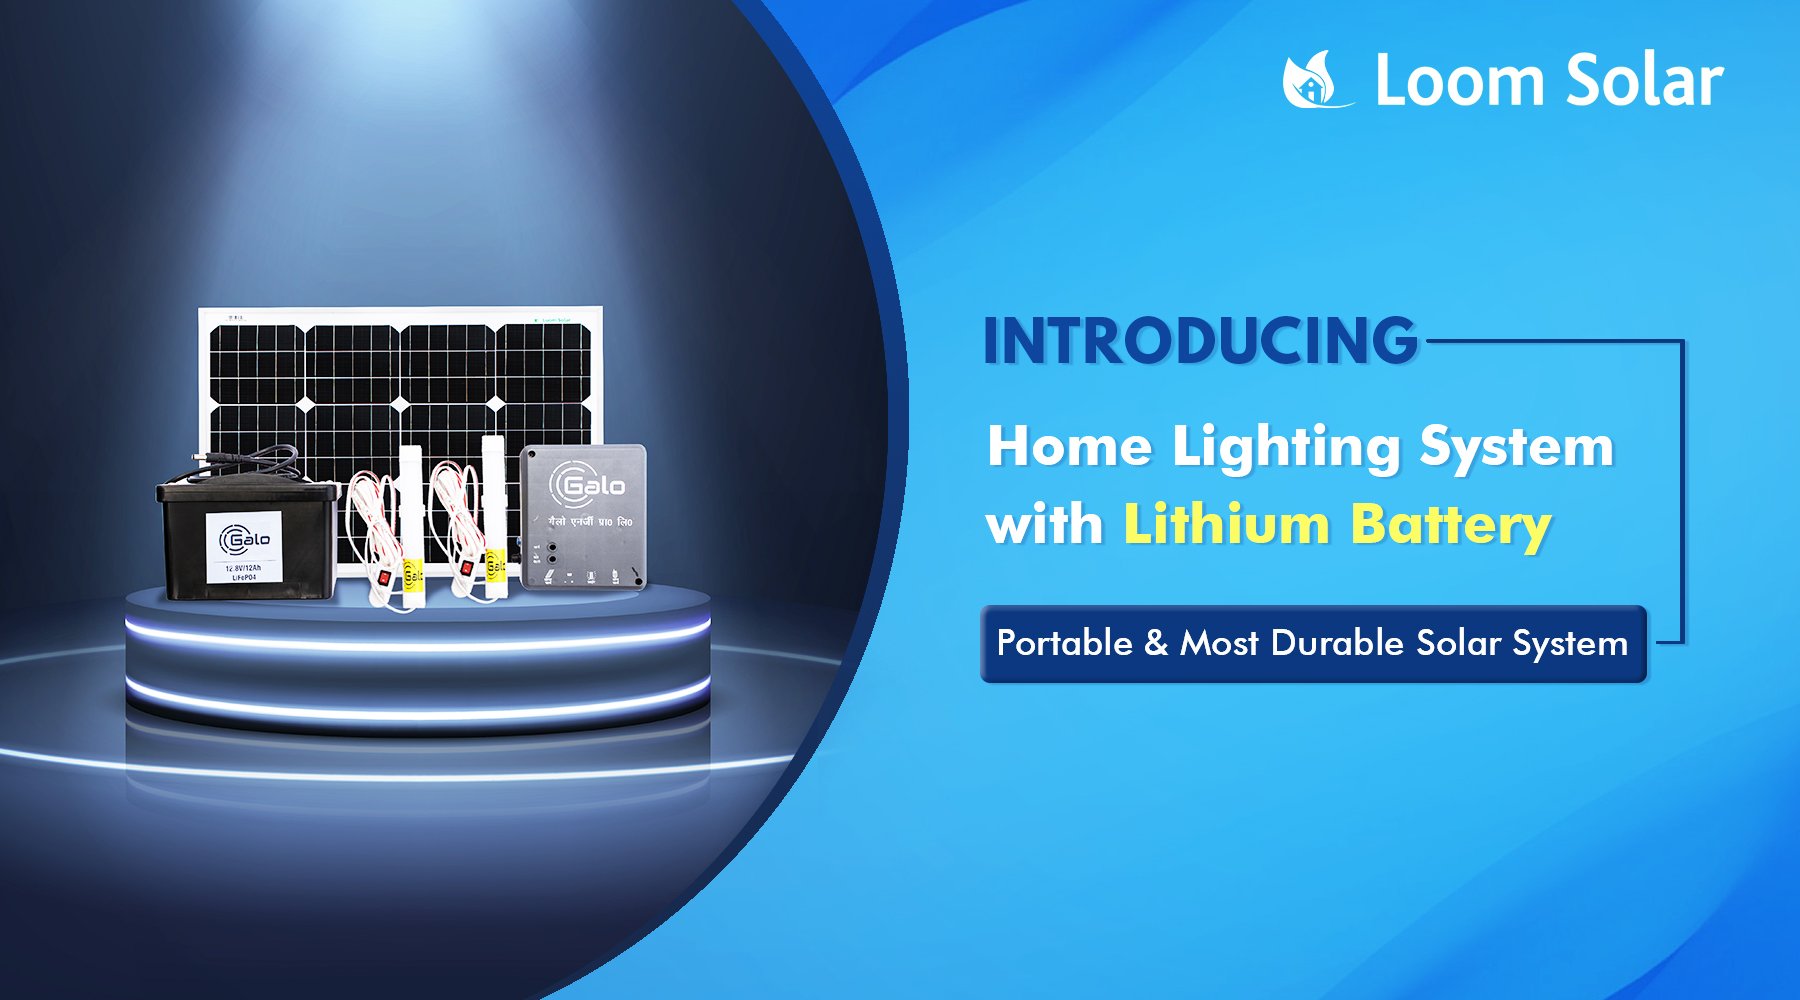 Loom Solar Introducing Small Solar Home Lighting System for Villages